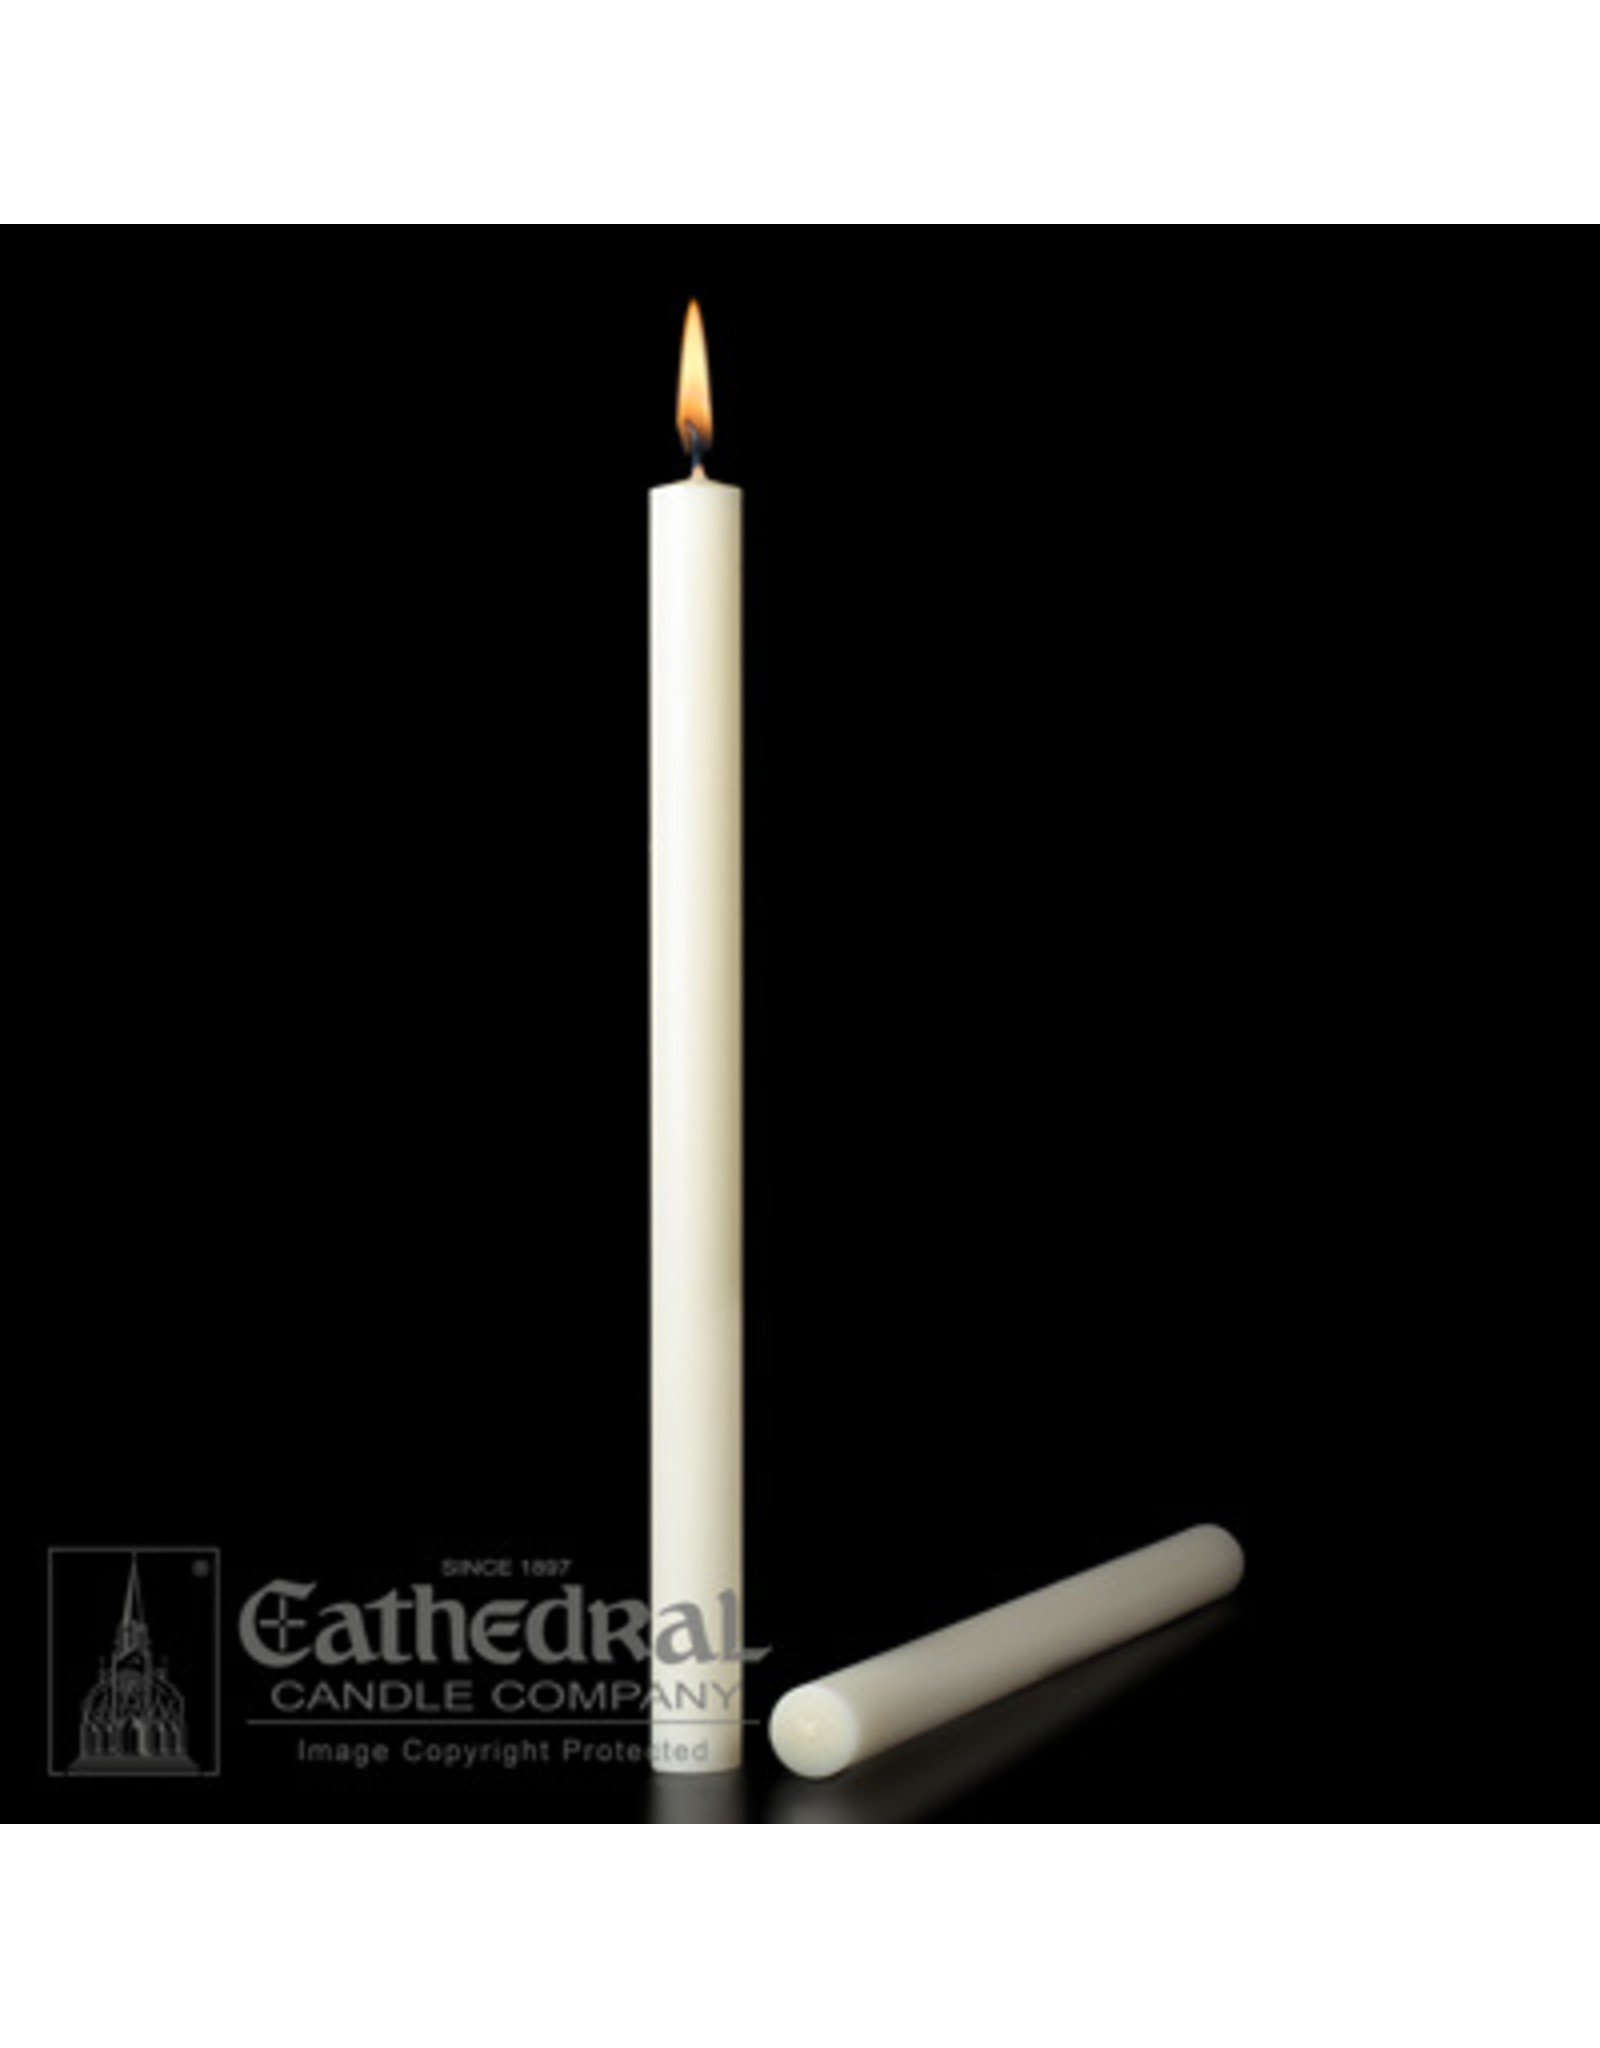 Cathedral Candle 51% Beeswax Altar Candles 2"x24" PE (2)